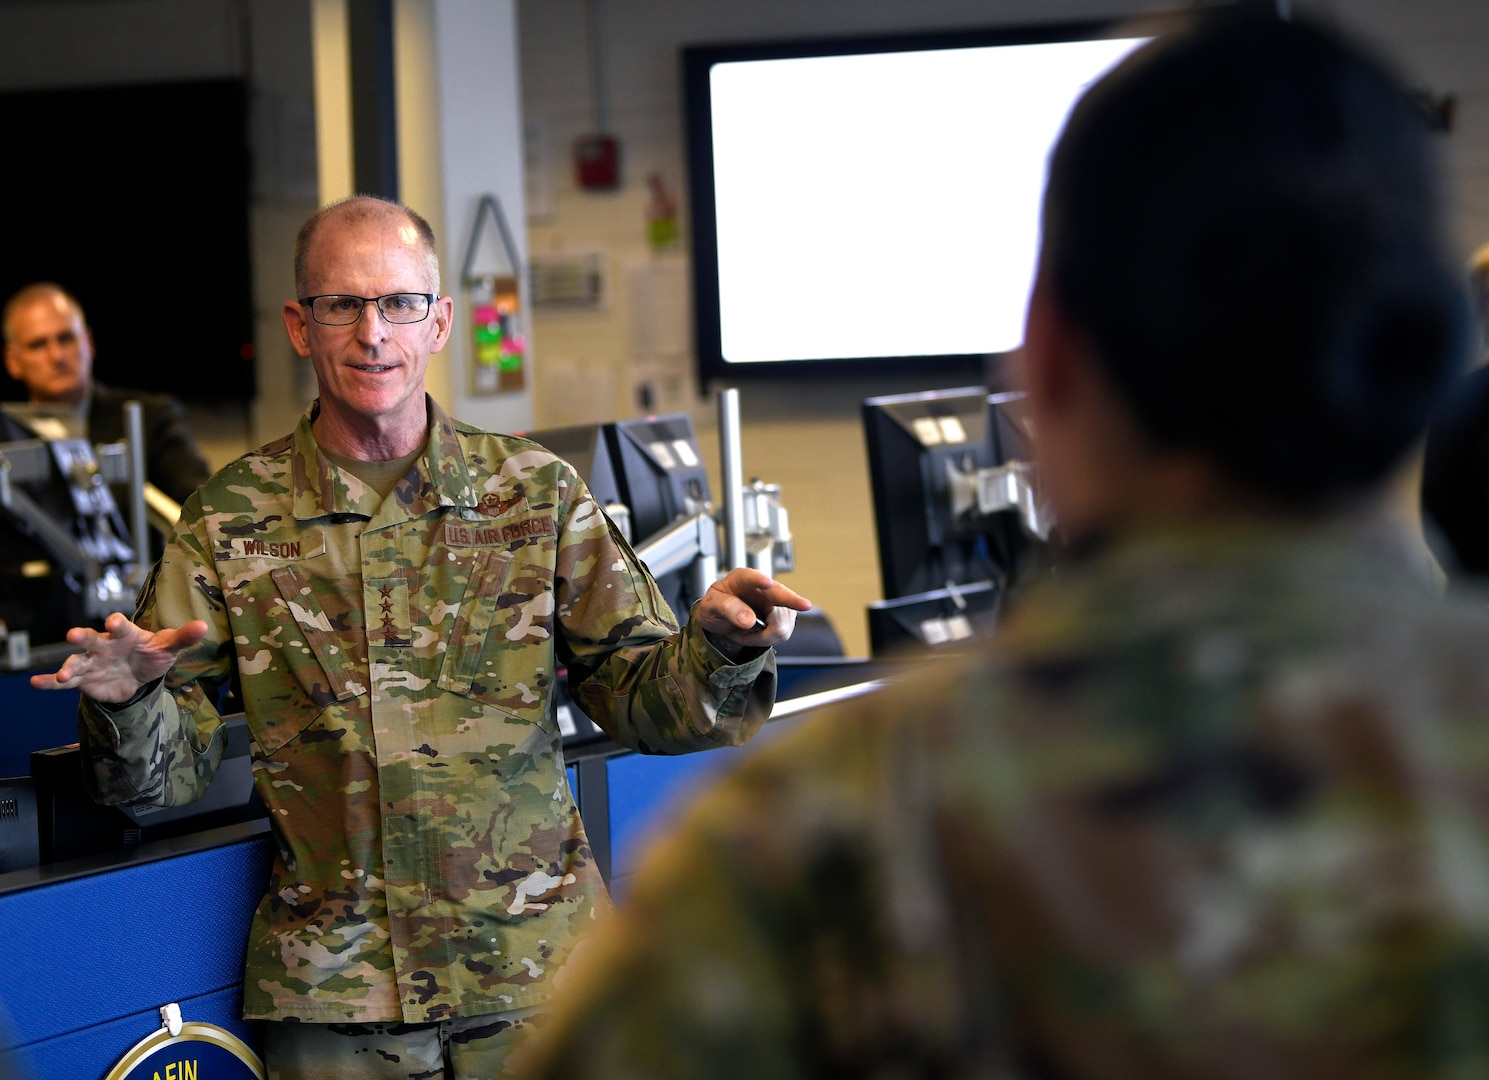 Gen. Stephen Wilson, Vice Chief of Staff of the Air Force, meets with 690th Network Support Squadron Airmen at Joint Base San Antonio-Lackland Aug. 28. Wilson visited several 24th Air Force units to meet Airmen and hear about their cyber mission capabilities.